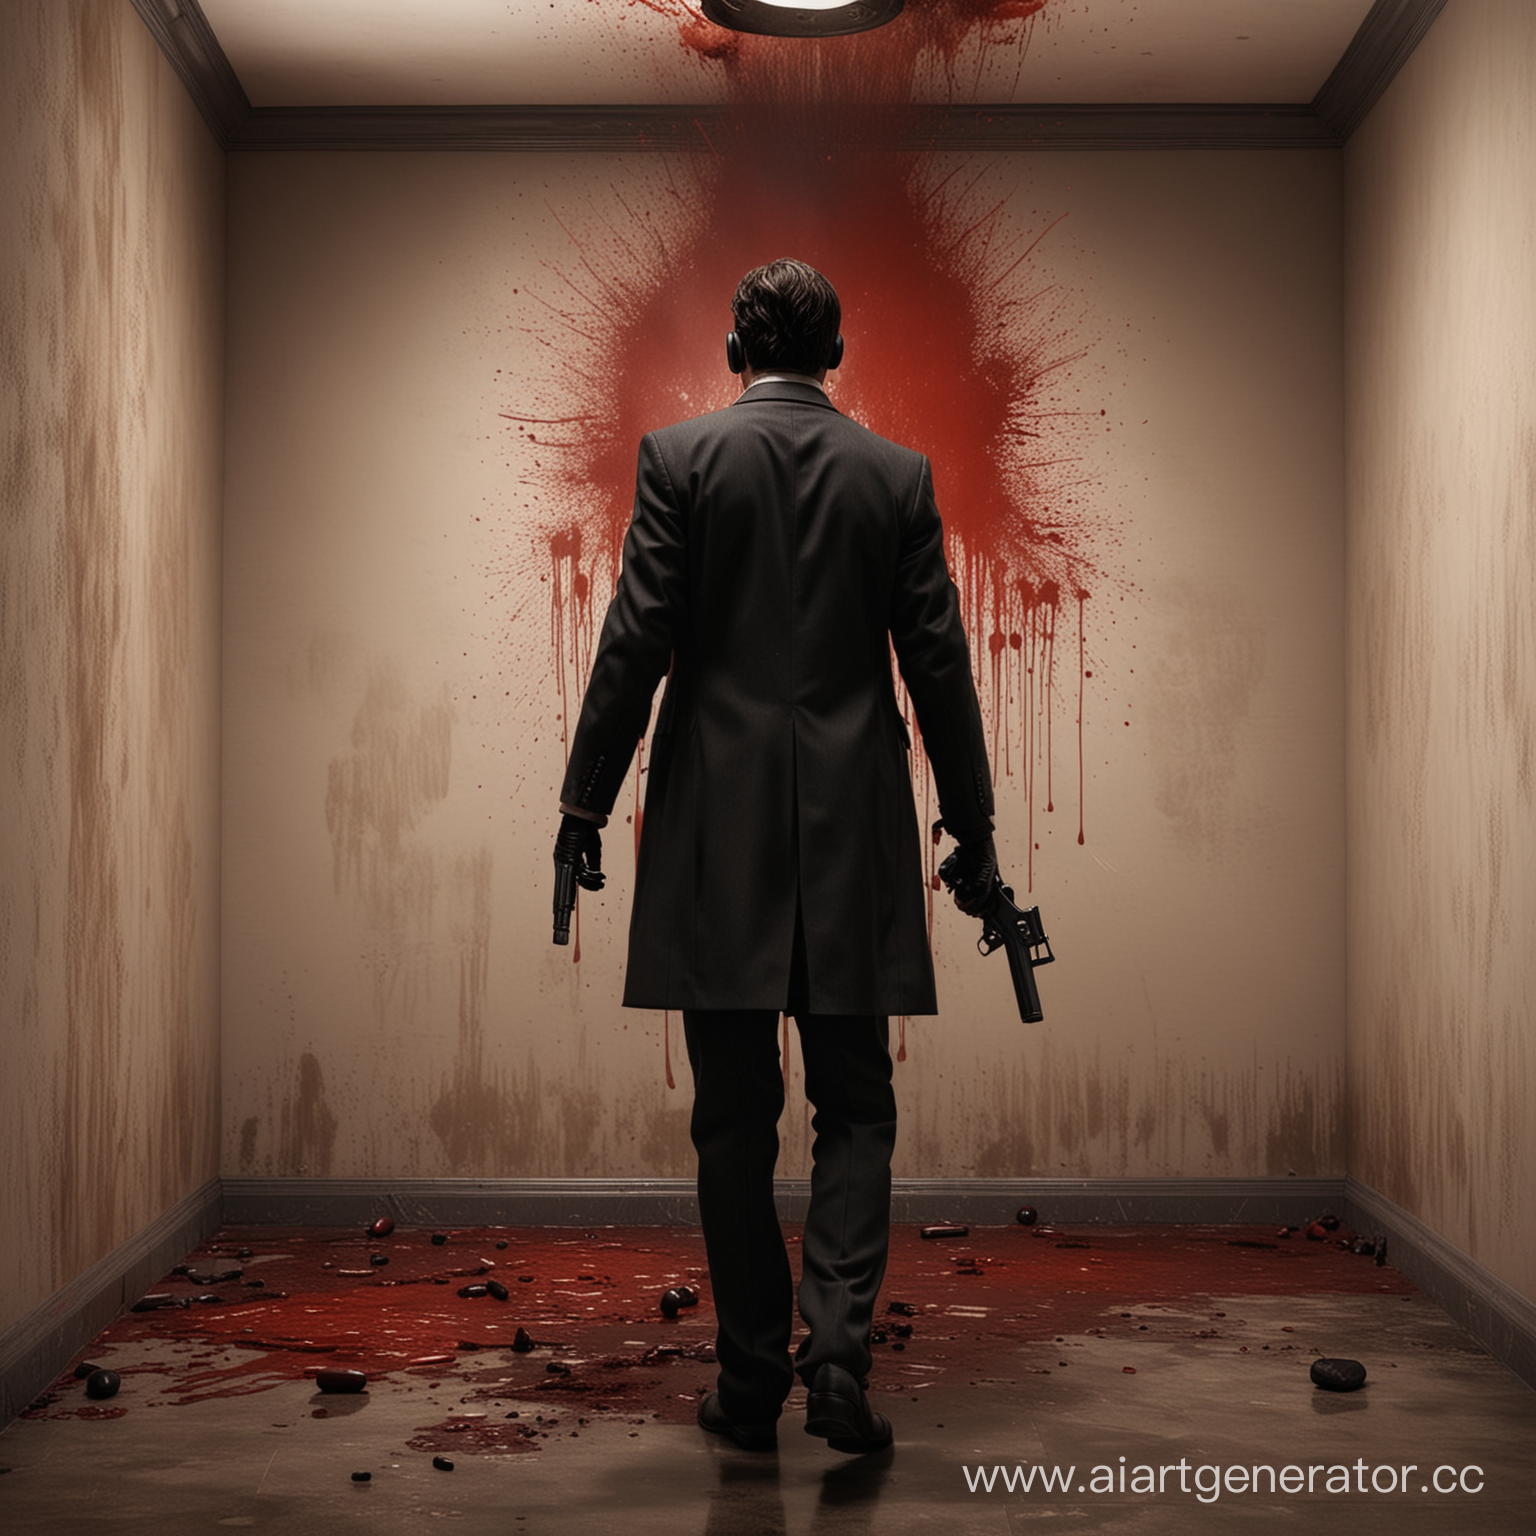 killer, standing with his back to the camera, no face visible, in a business suit, coat, black gloves, pistol with a silencer in his hand, a splash of blood on the wall, a corpse underfoot, 3D, realism, emphasis on warm tones, a scene in a hotel.